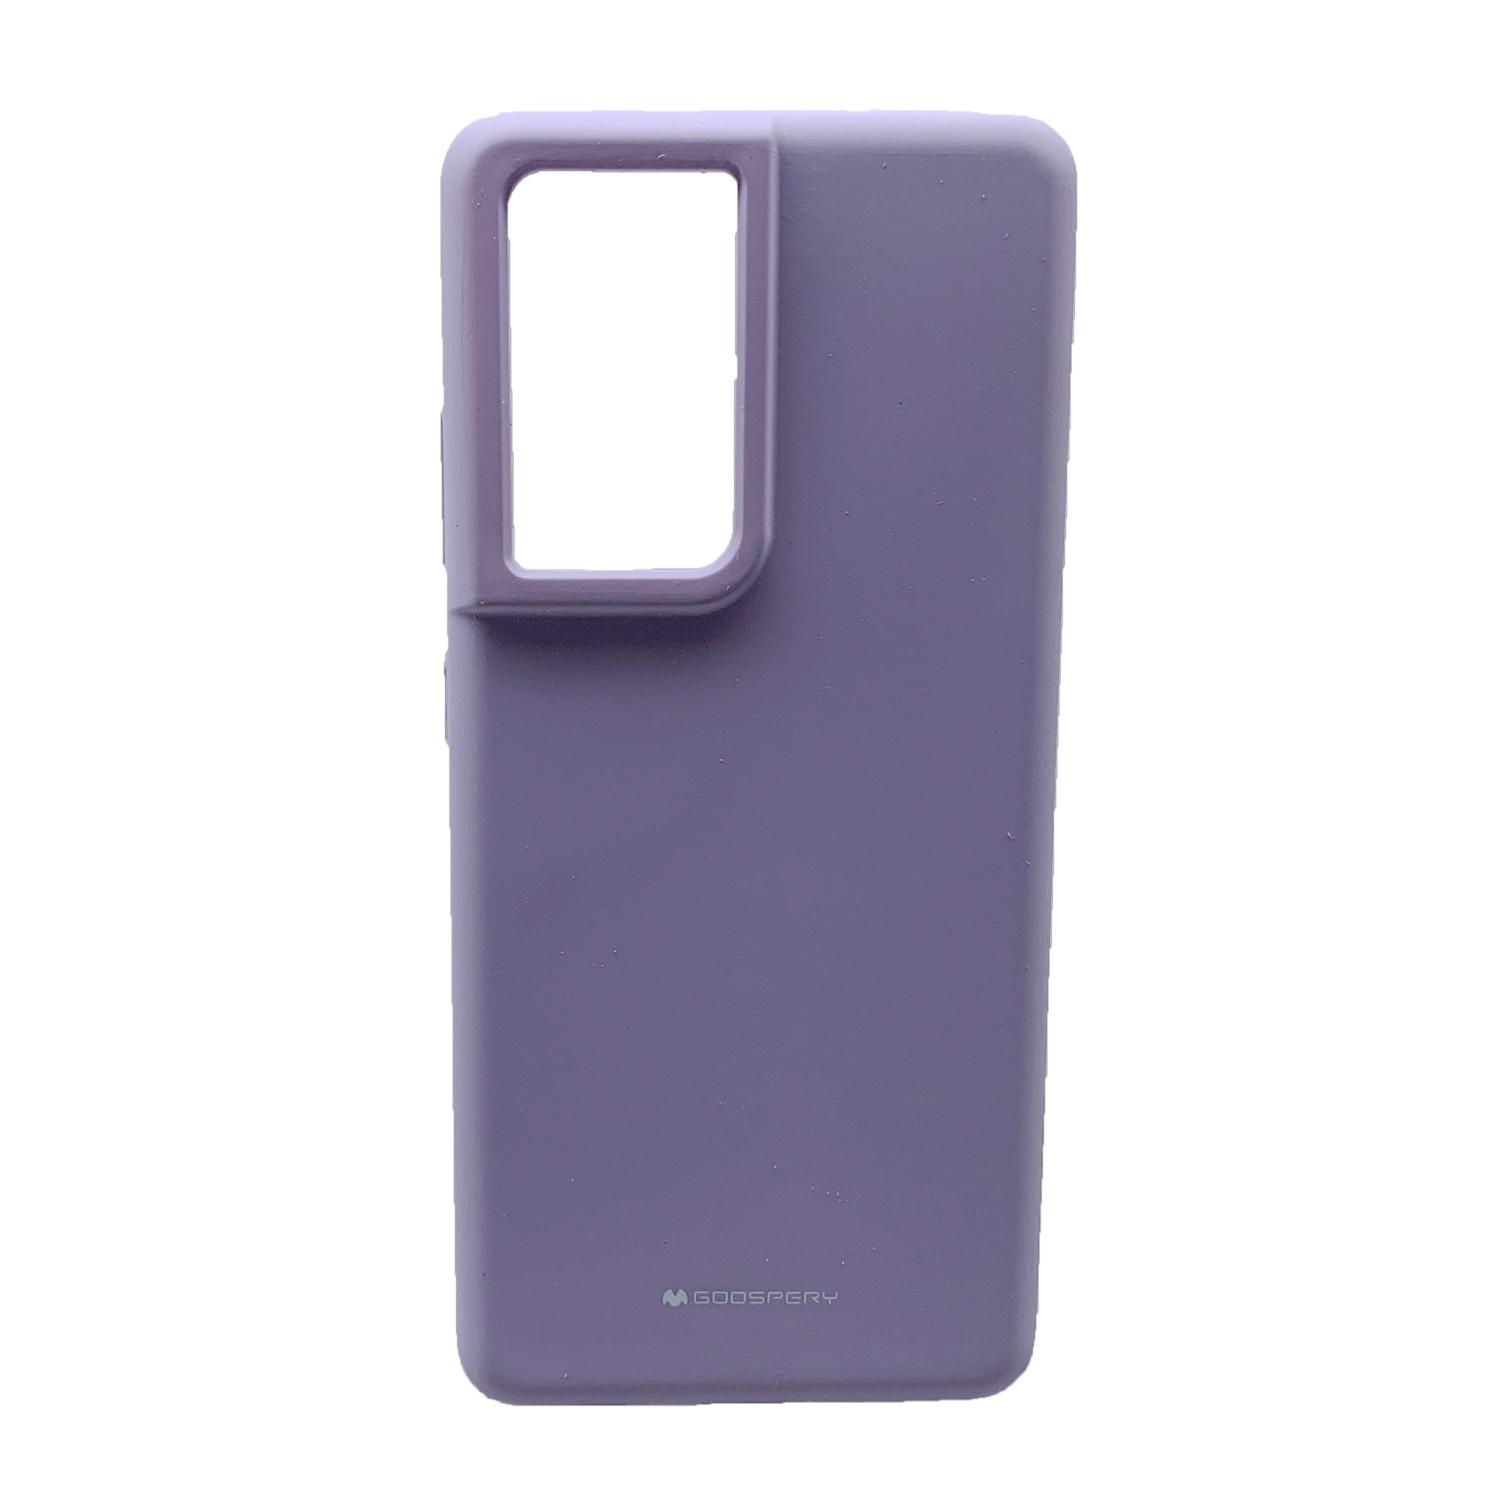 TopSave Goospery Liquid Silicone Gel Rubber Full Body Protection Cover Case For Samsung S21 Ultra, Purple